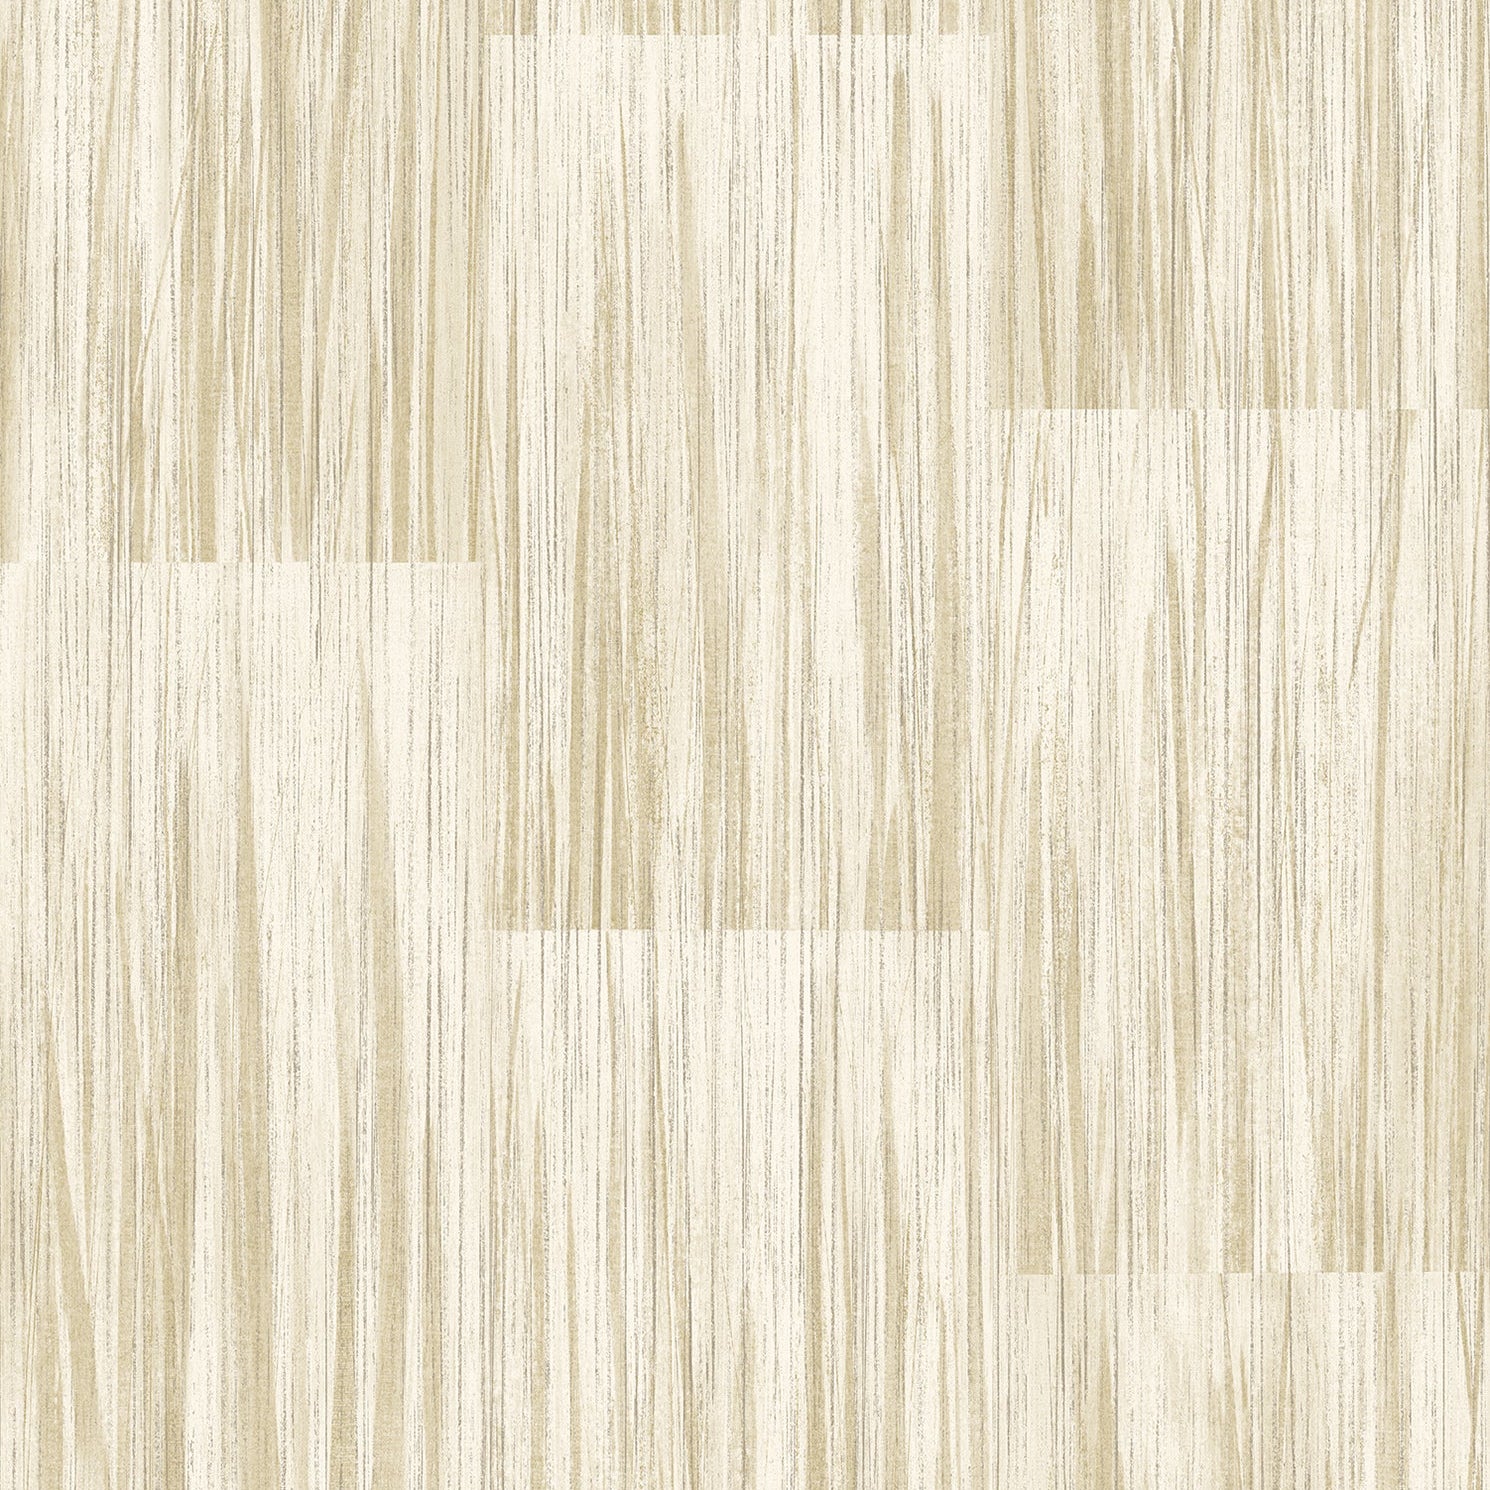 Select 4020-85717 Geo & Textures Soren Butter Striated Plank Butter by Advantage